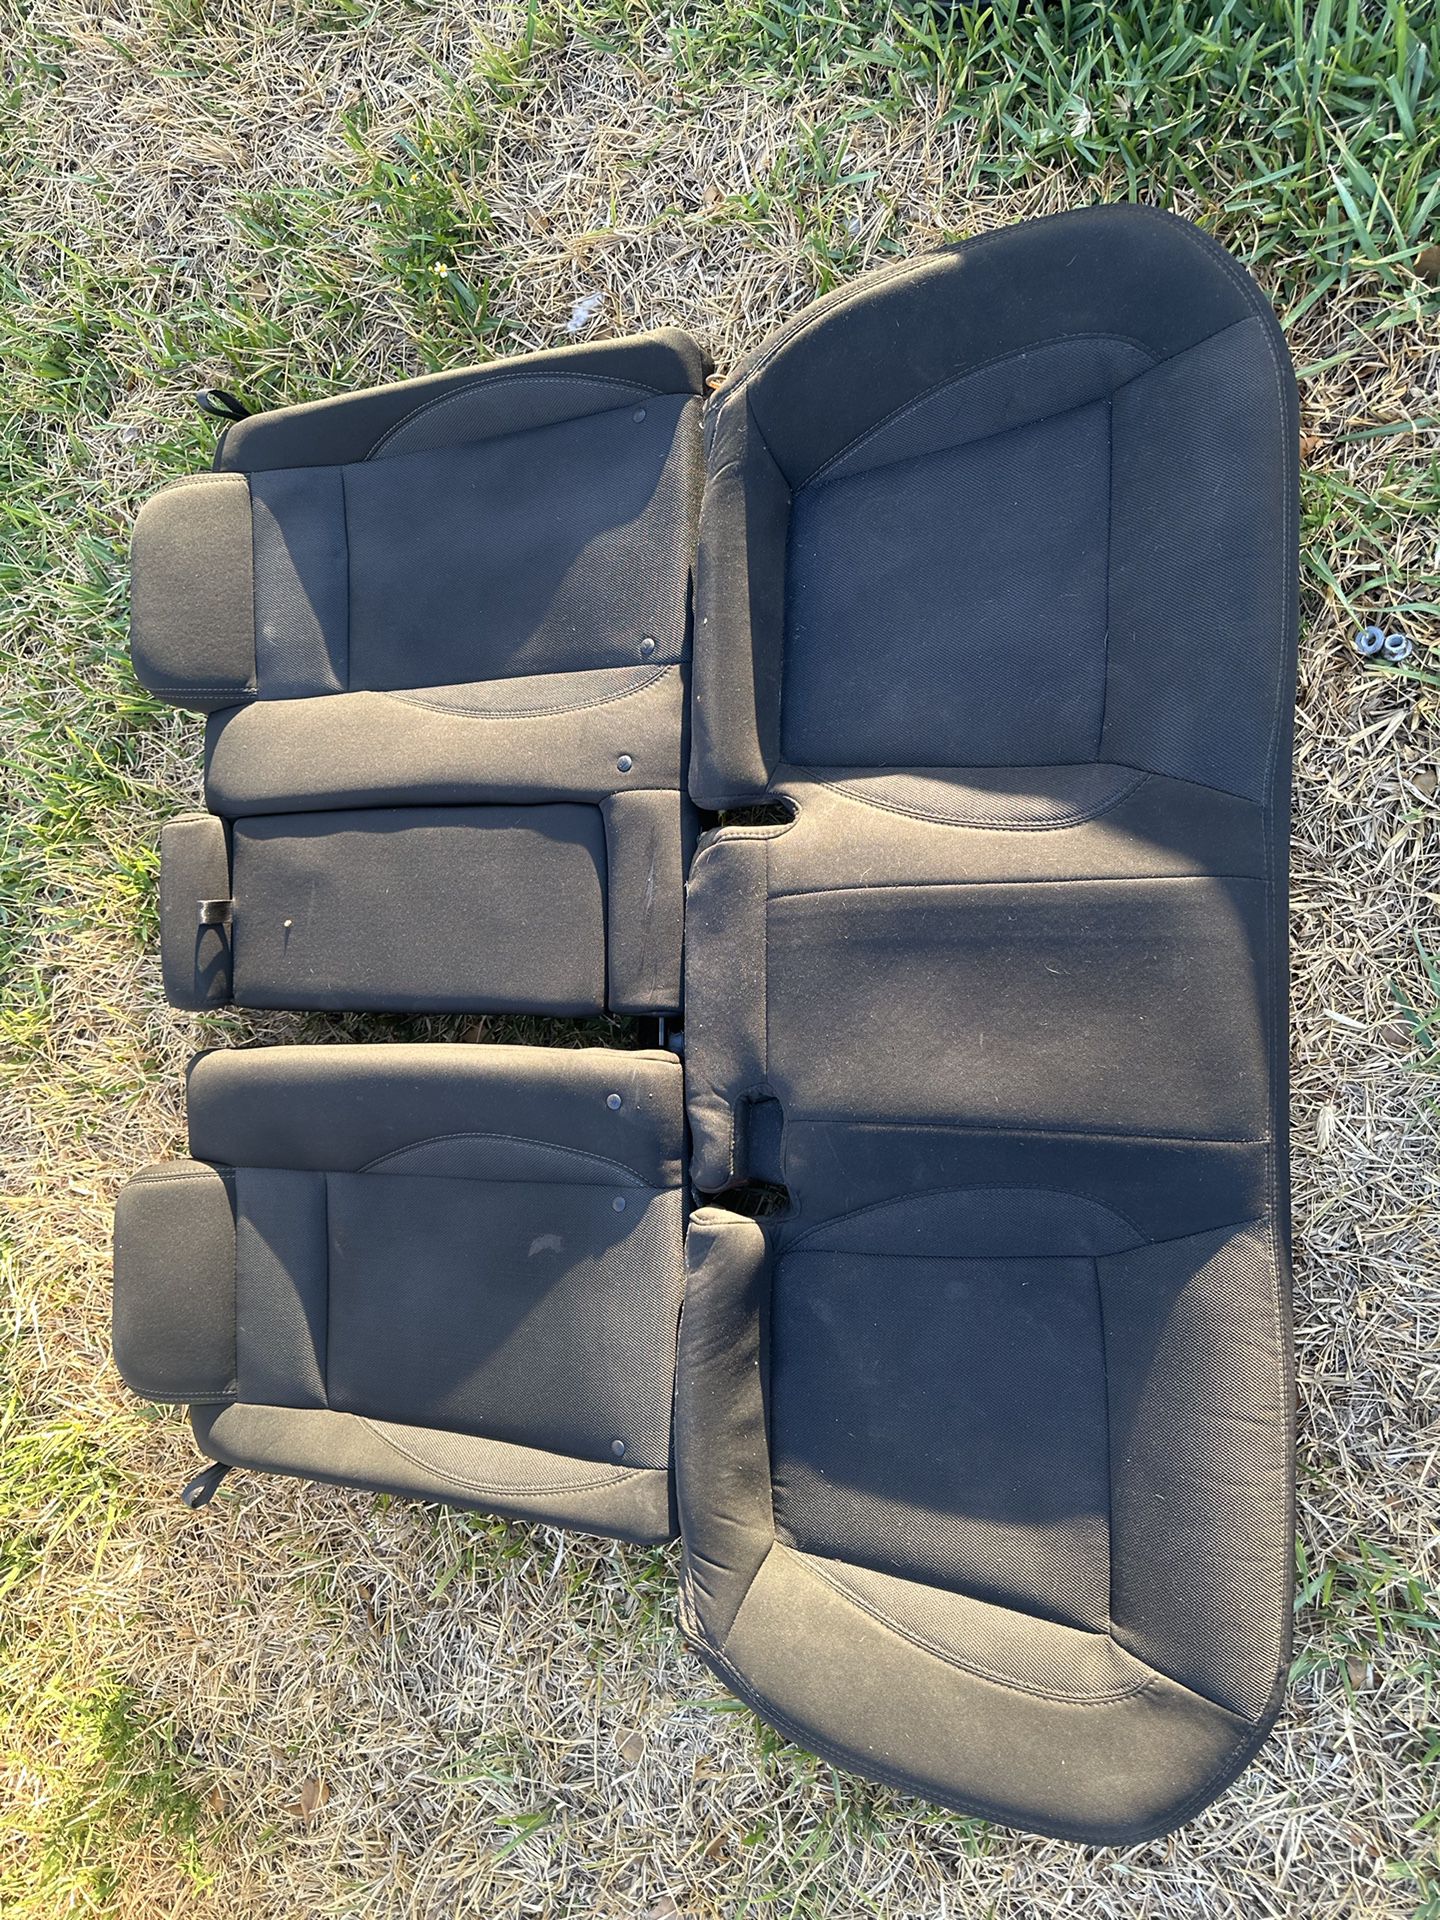 Dodge Charger Seats 